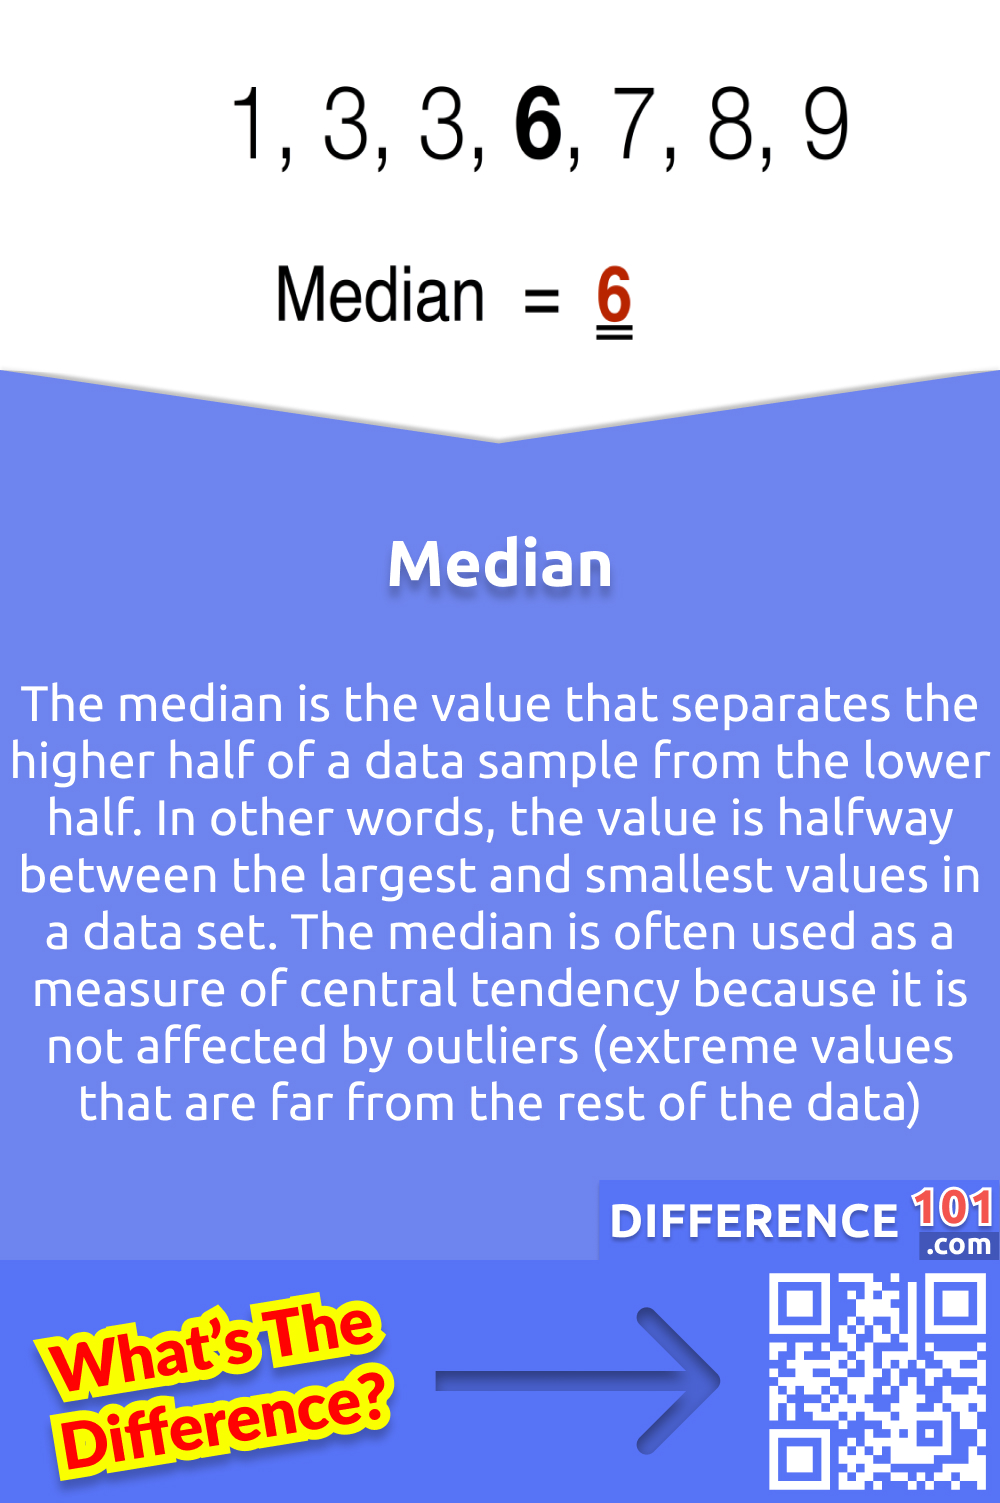 What Is Median? The median is the value that separates the higher half of a data sample from the lower half. In other words, the value is halfway between the largest and smallest values in a data set. The median is often used as a measure of central tendency because it is not affected by outliers (extreme values that are far from the rest of the data).